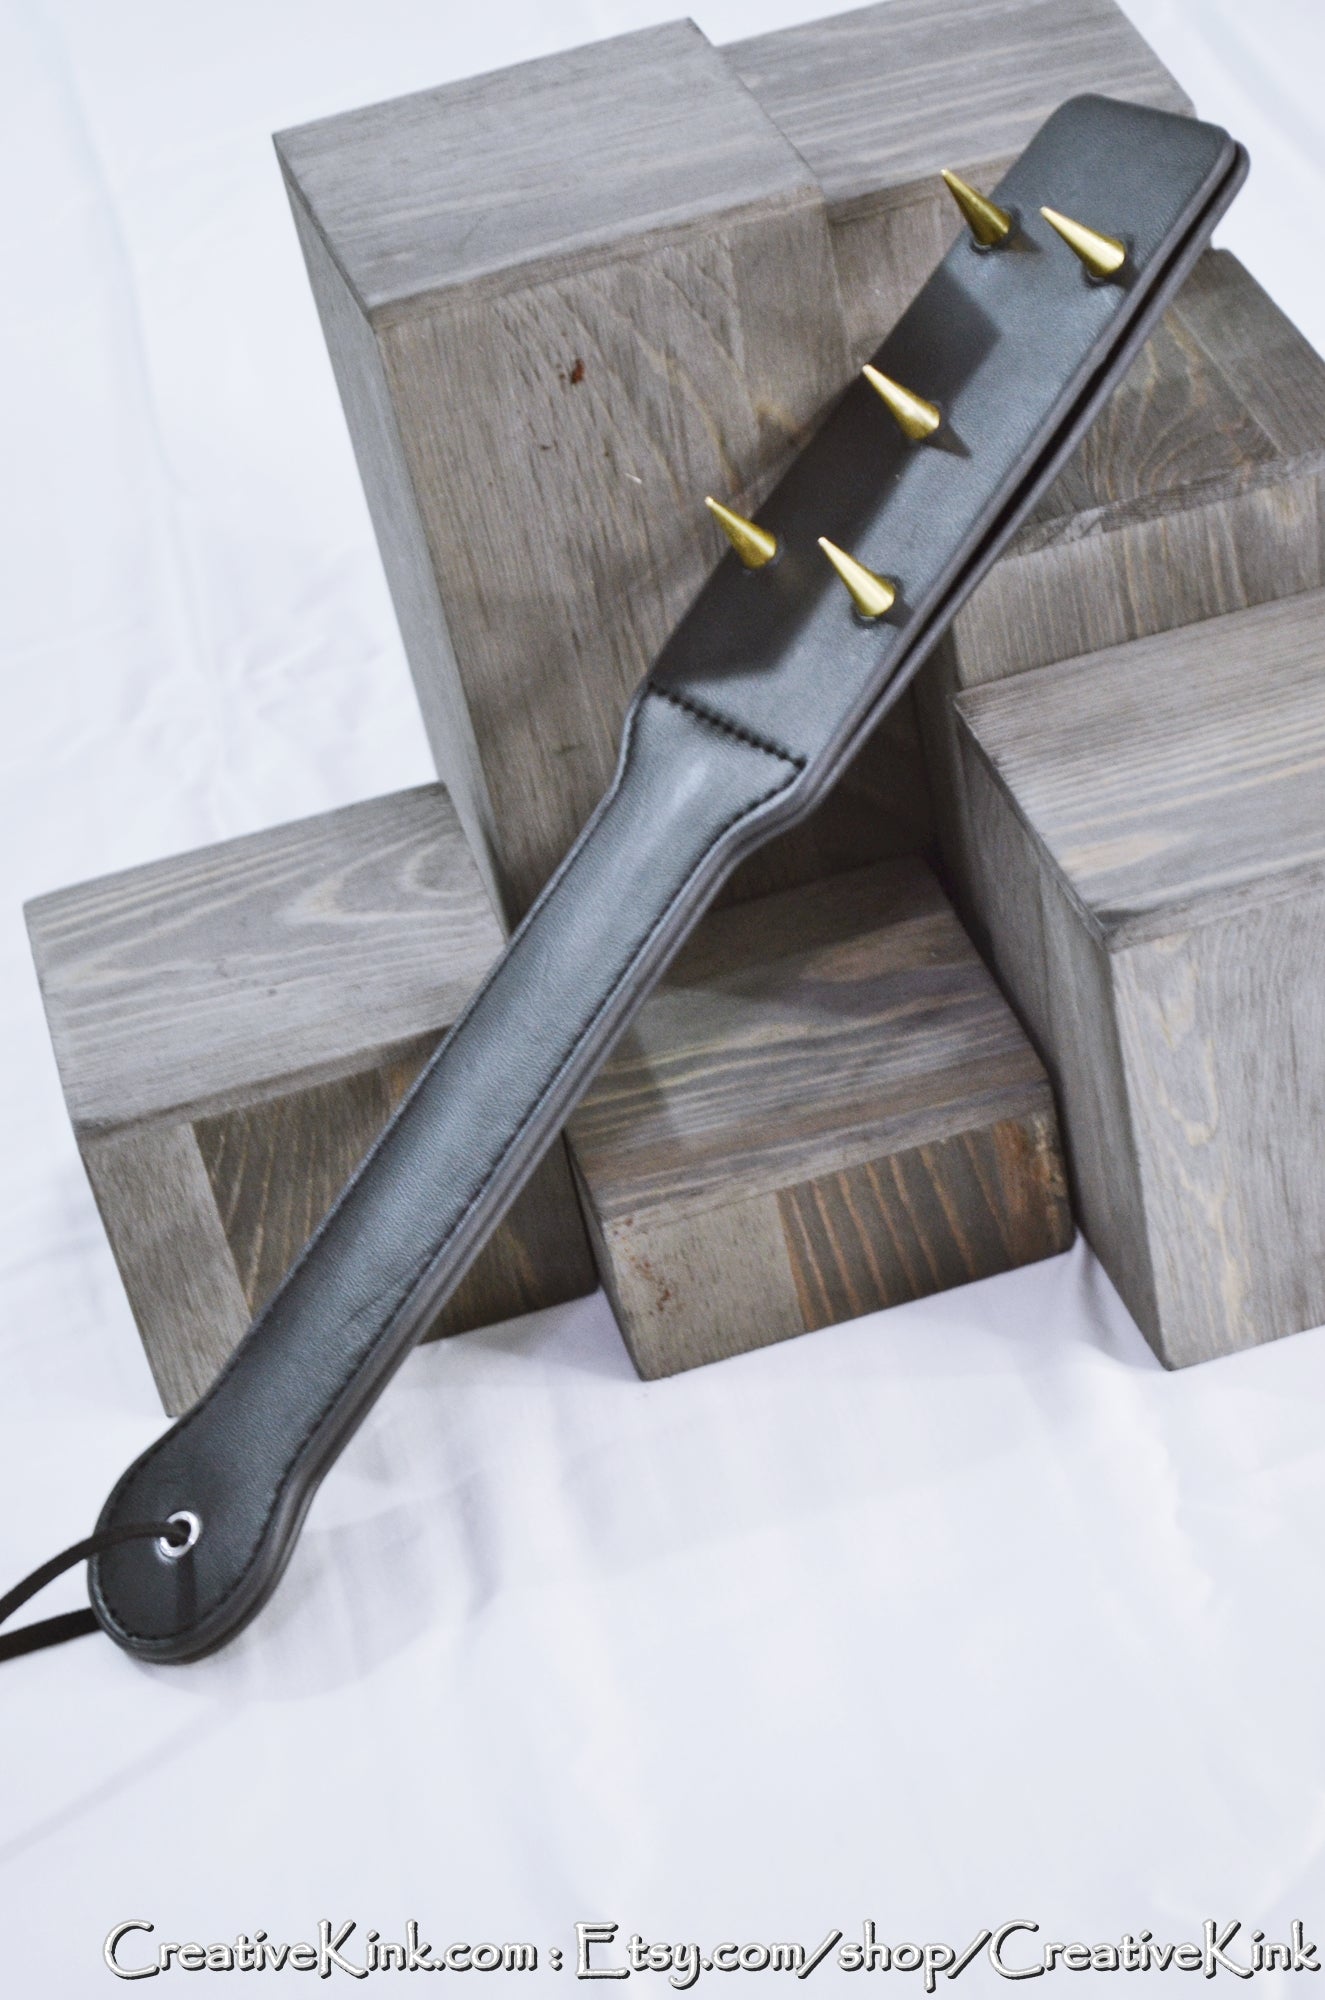 Leather Paddle - Thickened Leather with Steel or Brass Spikes - BDSM Spanking Tool